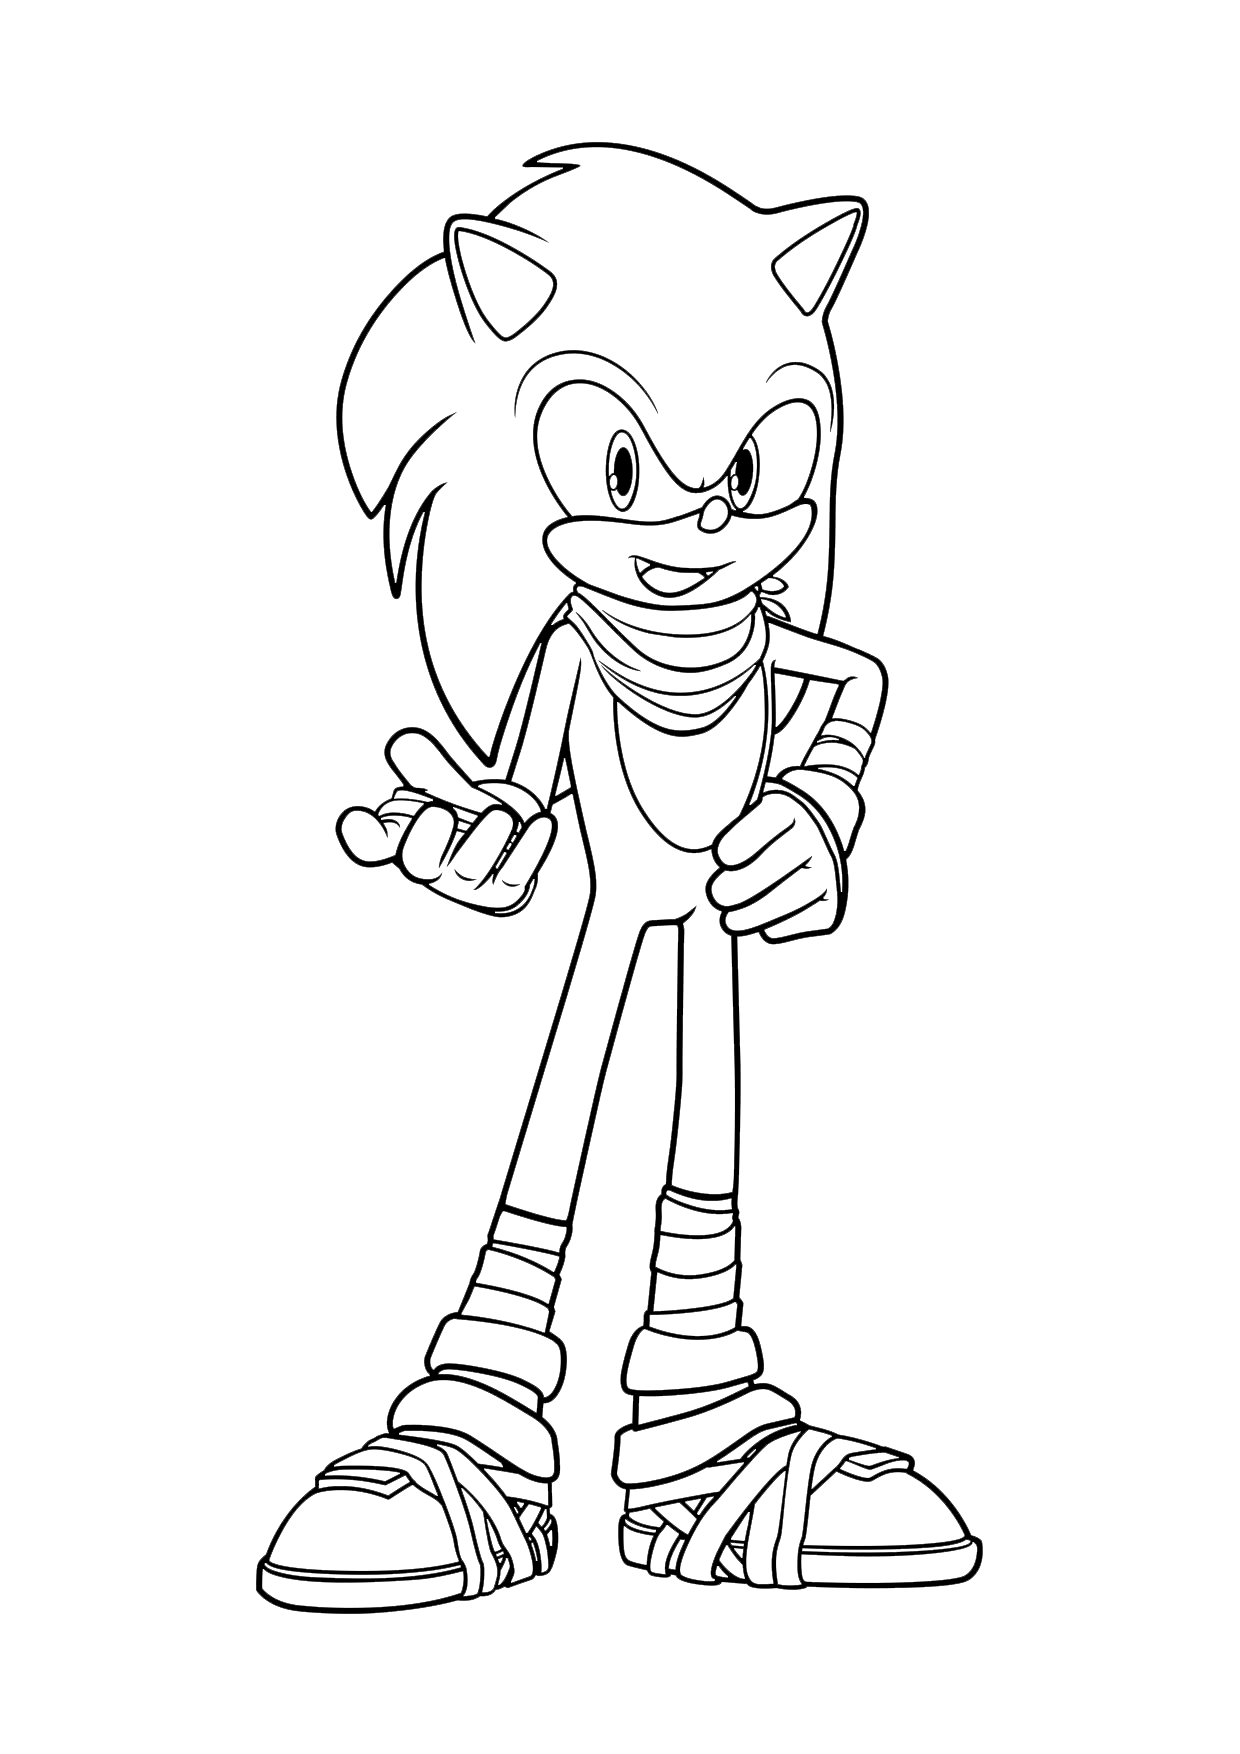 Sonic Ready To Fight Coloring Page - Free Printable Coloring Pages for Kids